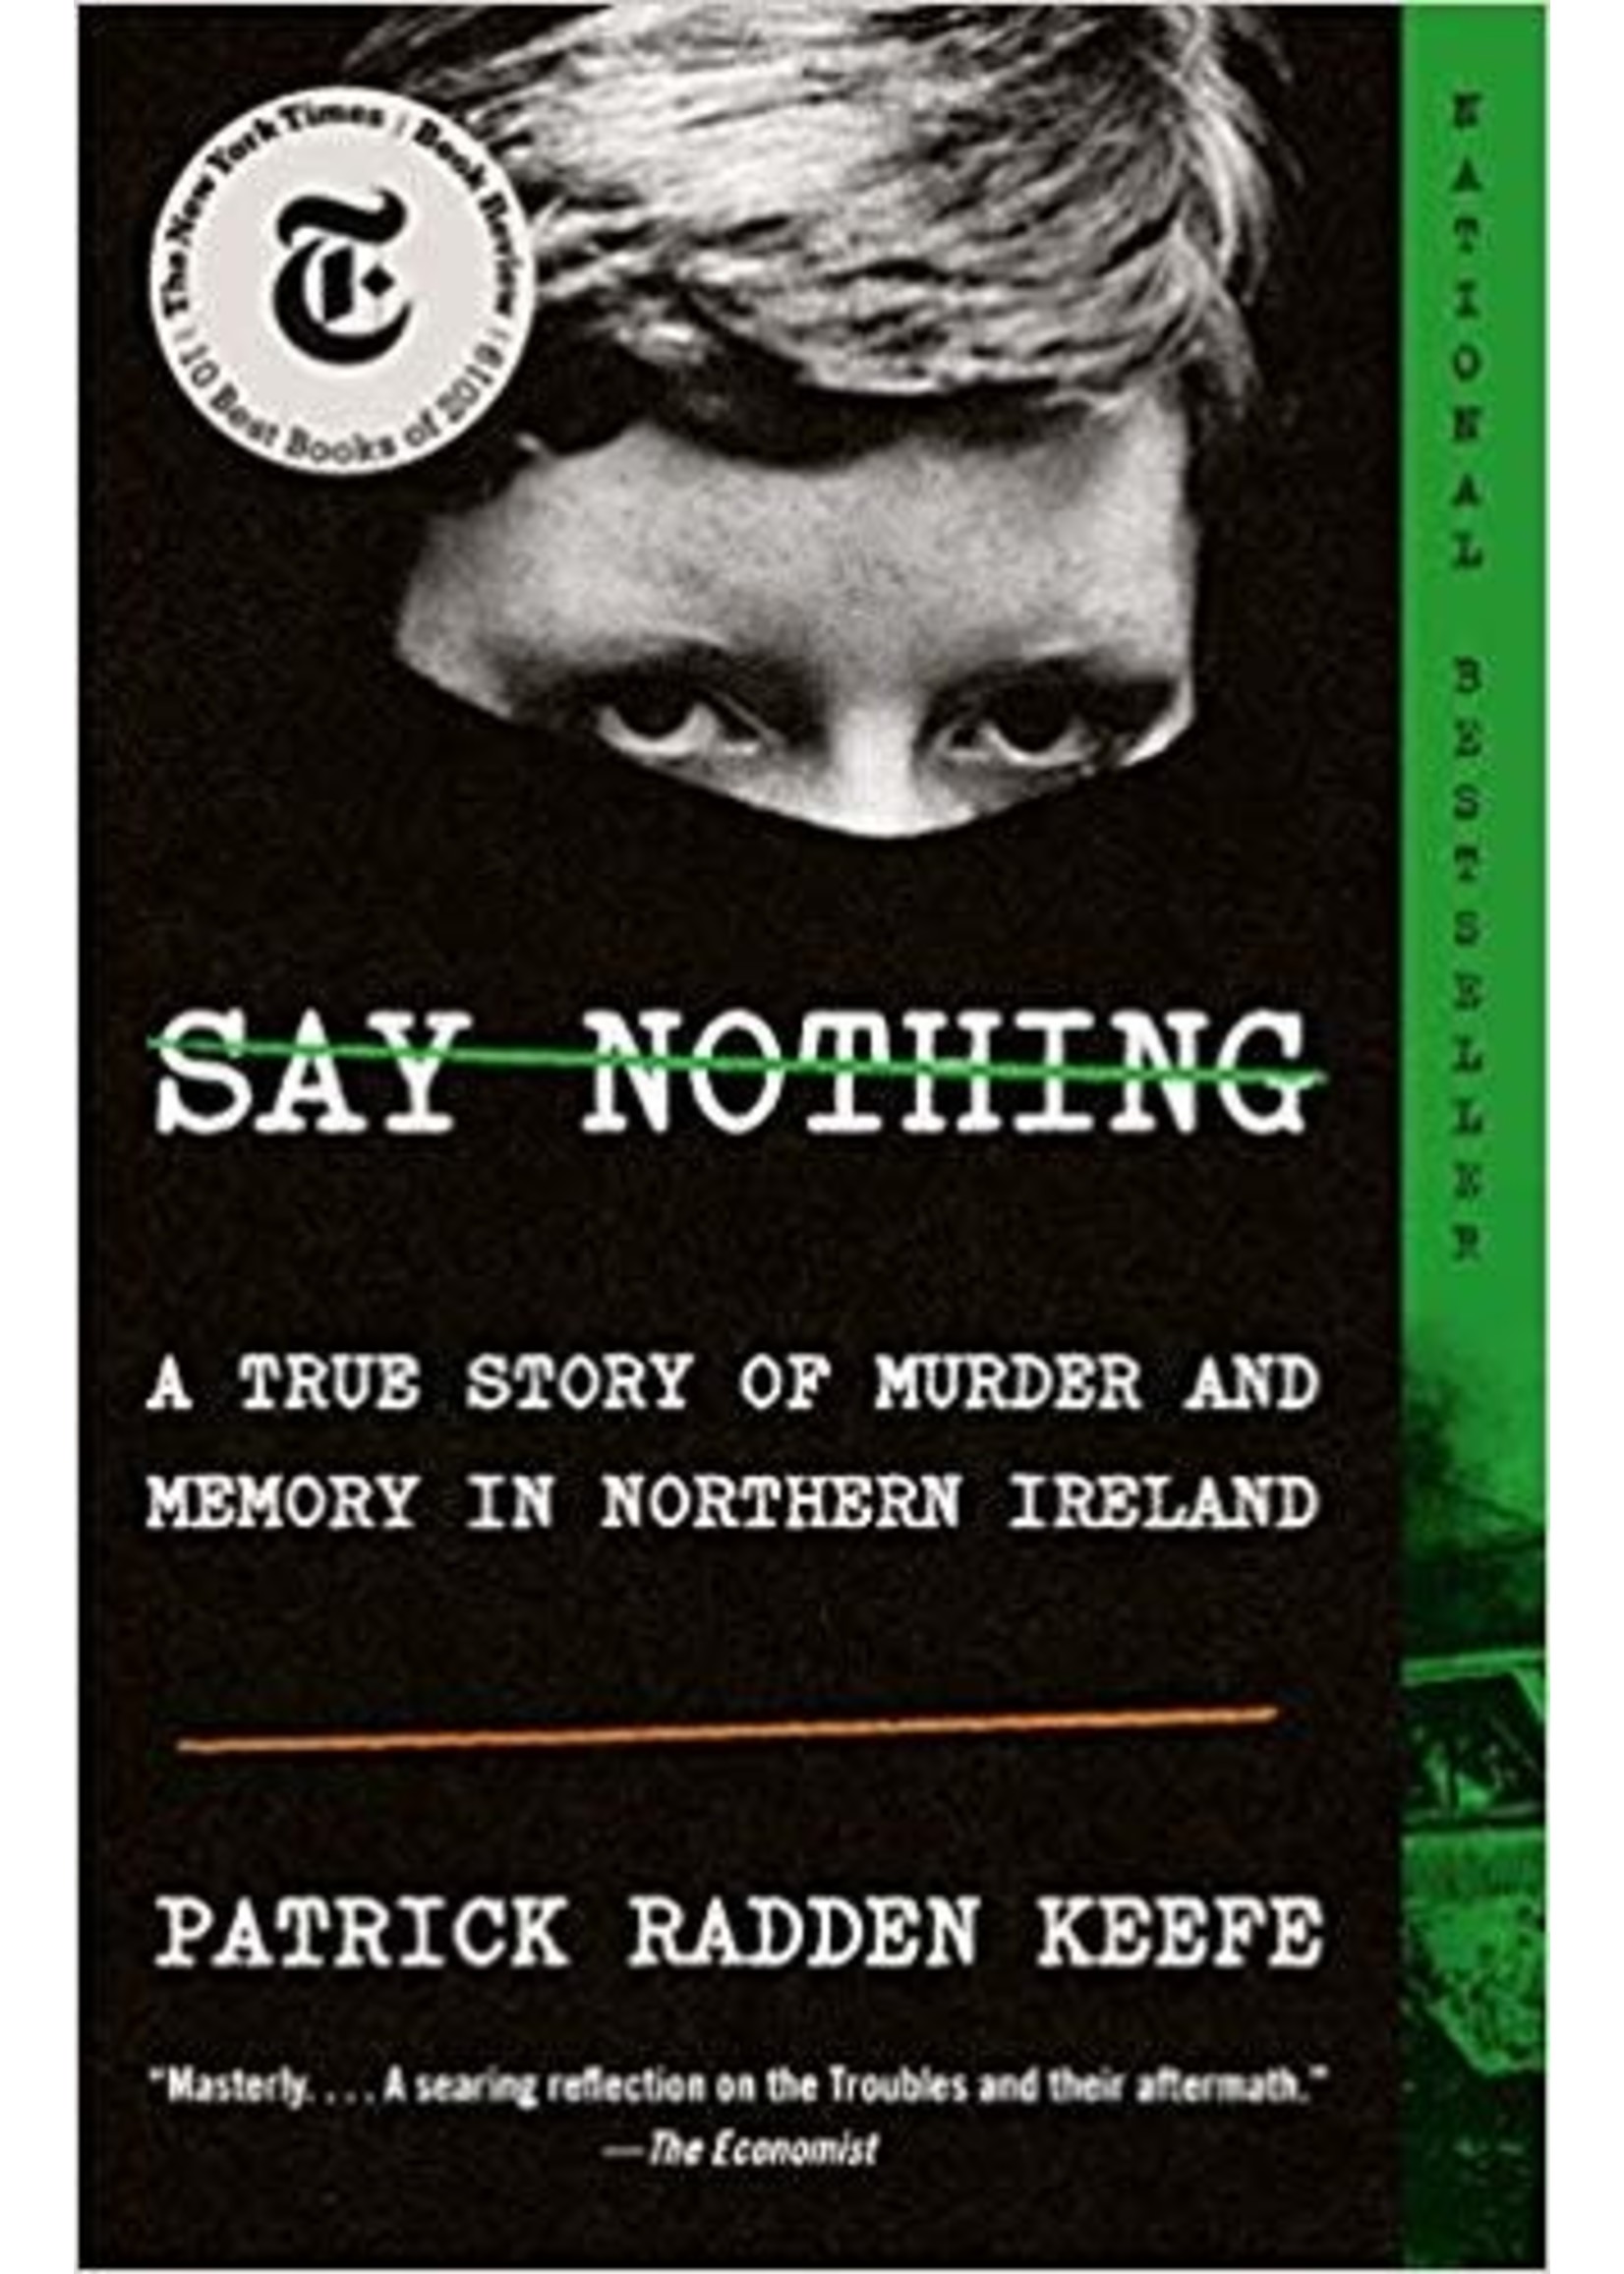 Say Nothing: A True Story of Murder and Memory in Northern Ireland by Patrick Radden Keefe